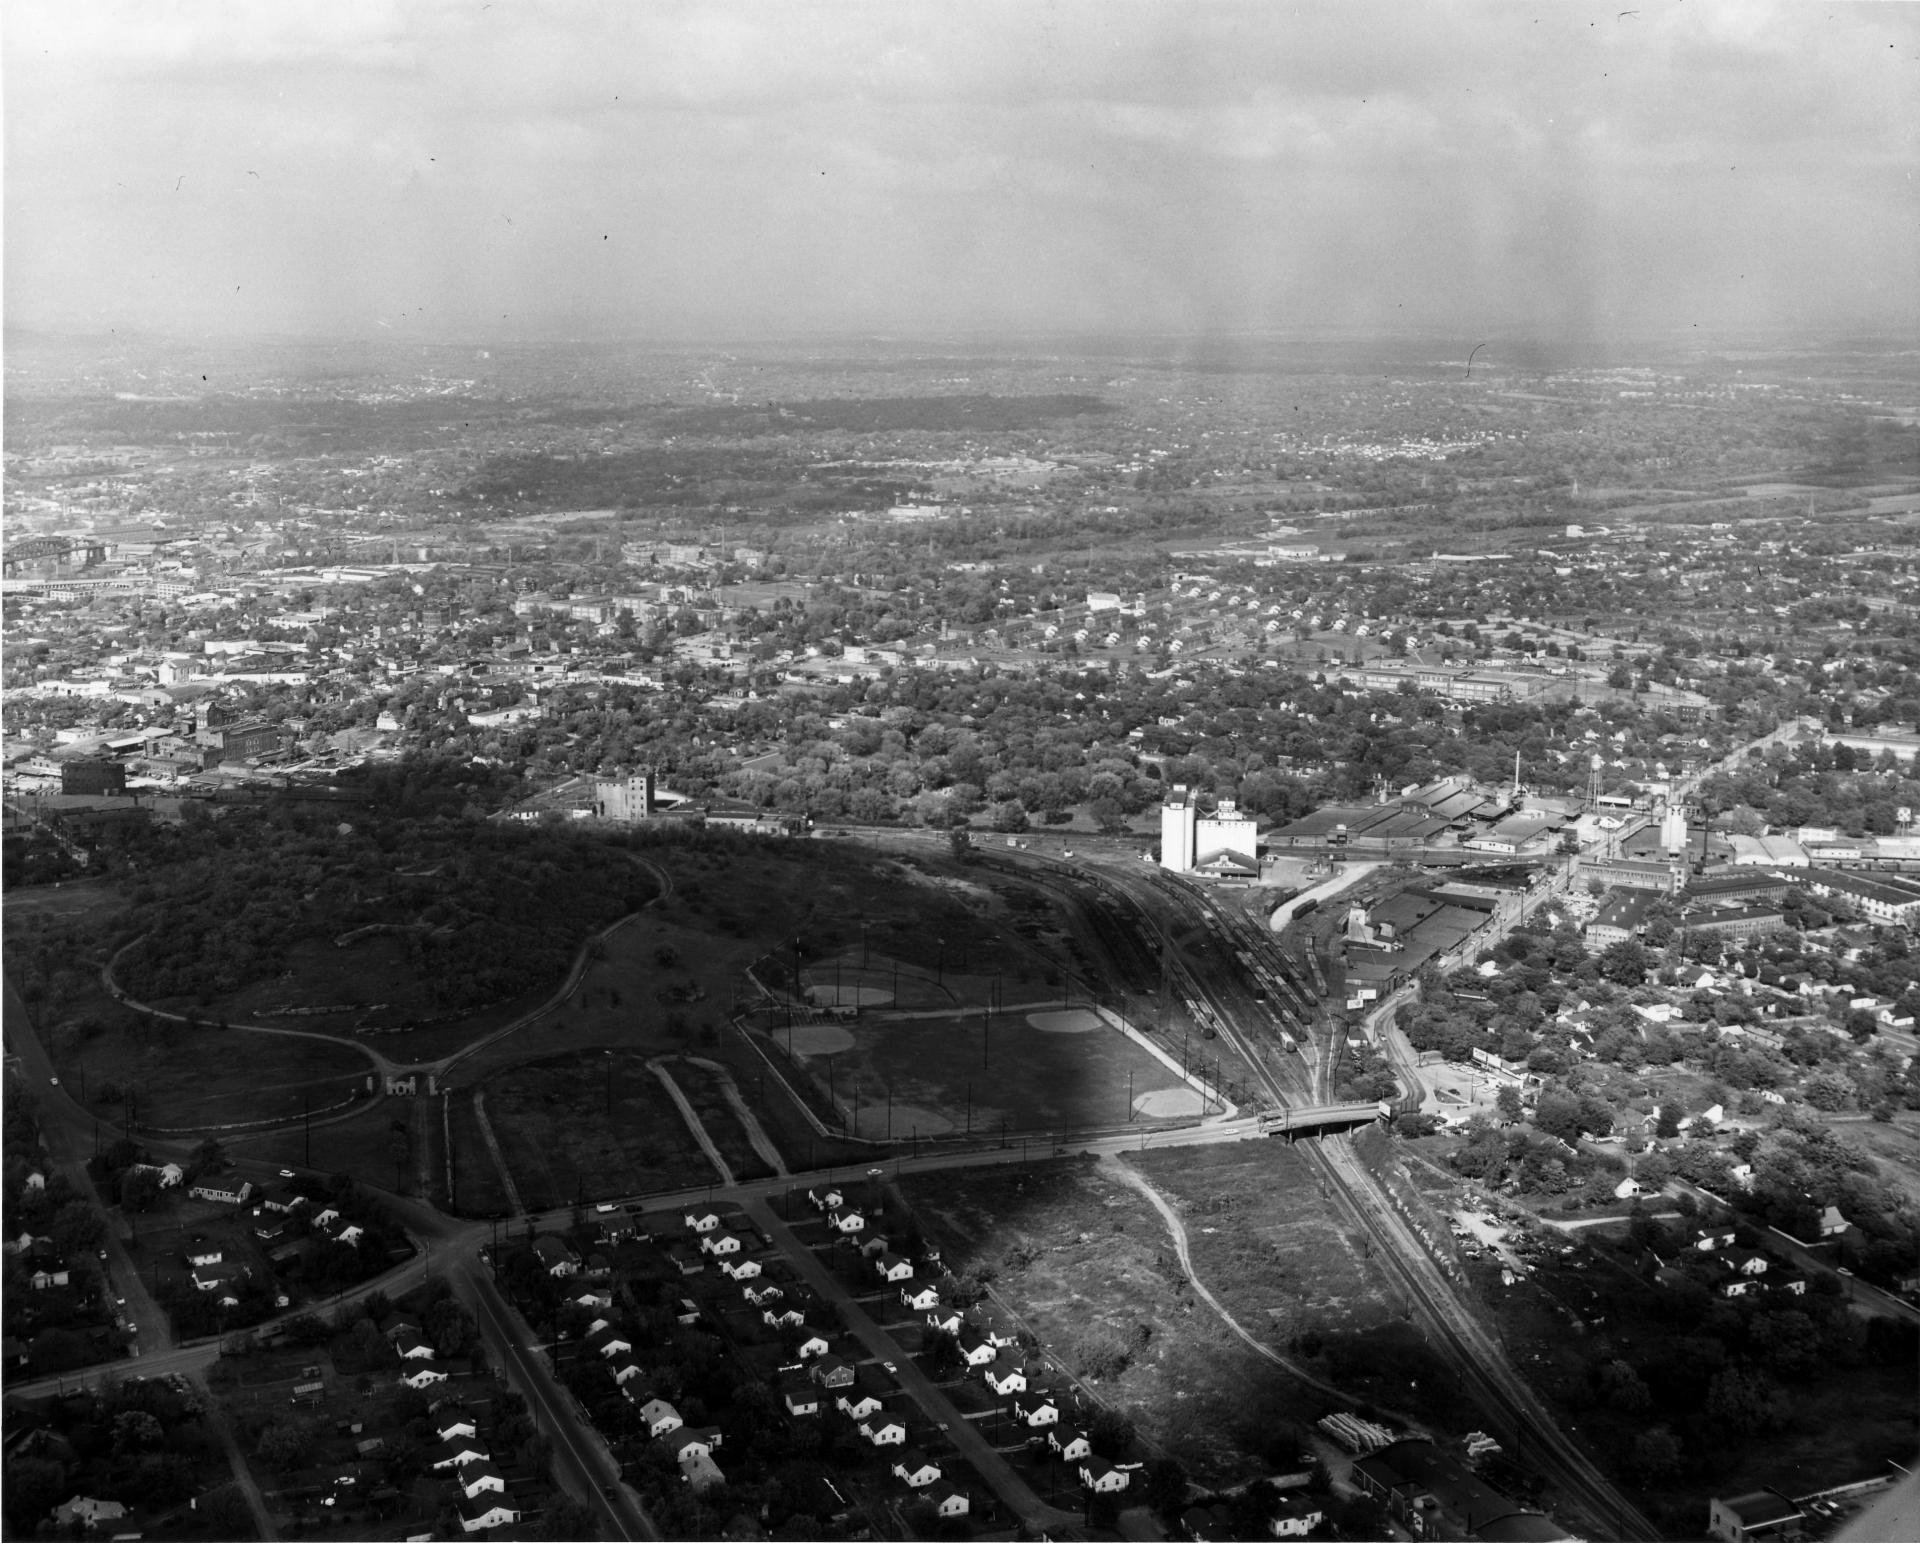 Fort Negely Park aerial view, 1940, courtesy of Battle of Nashville Trust